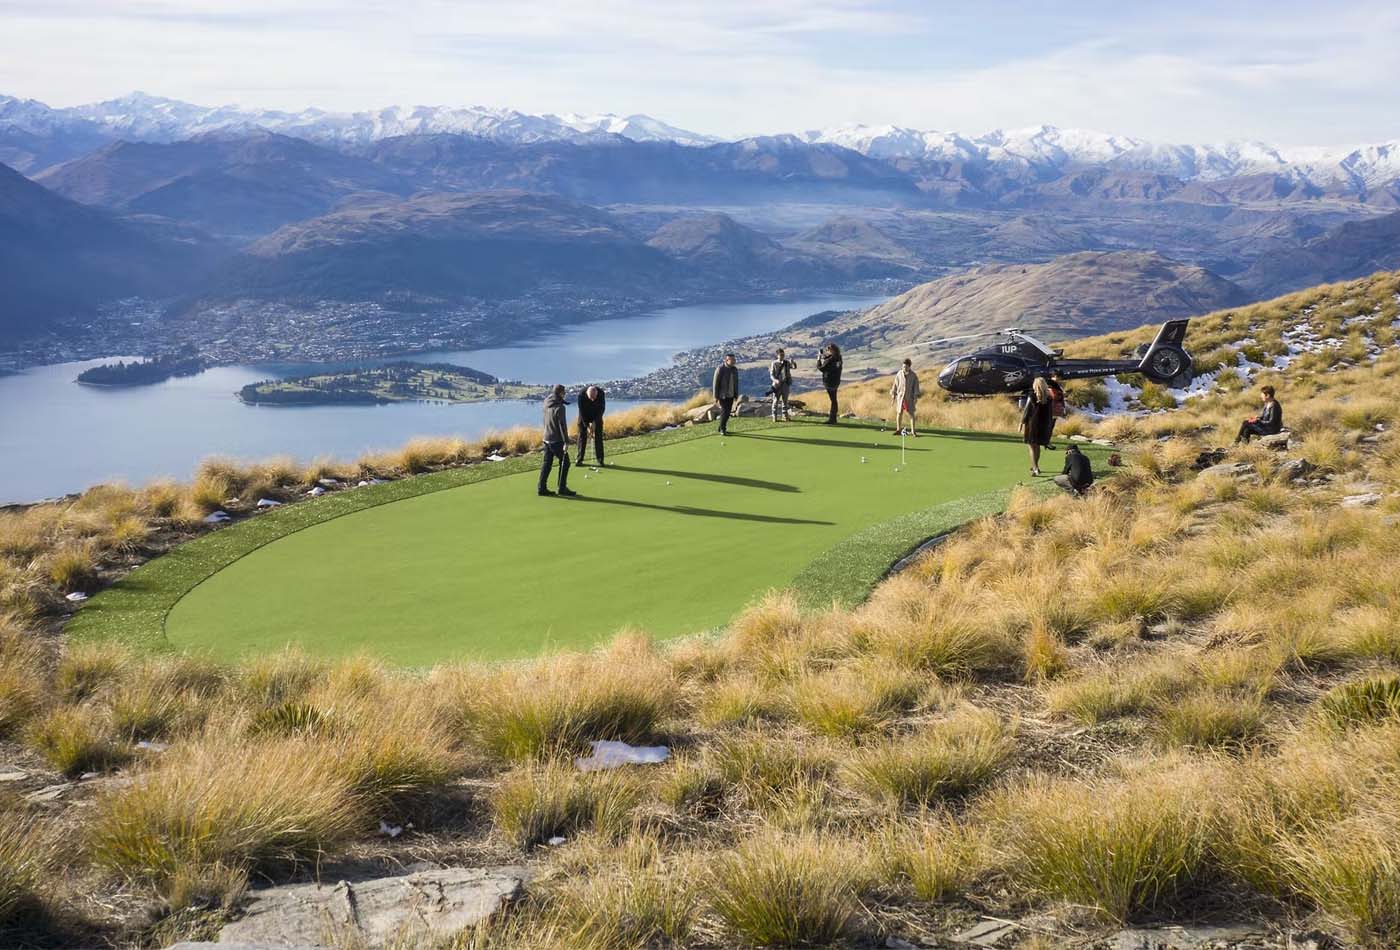 Group playing golf on a mountain